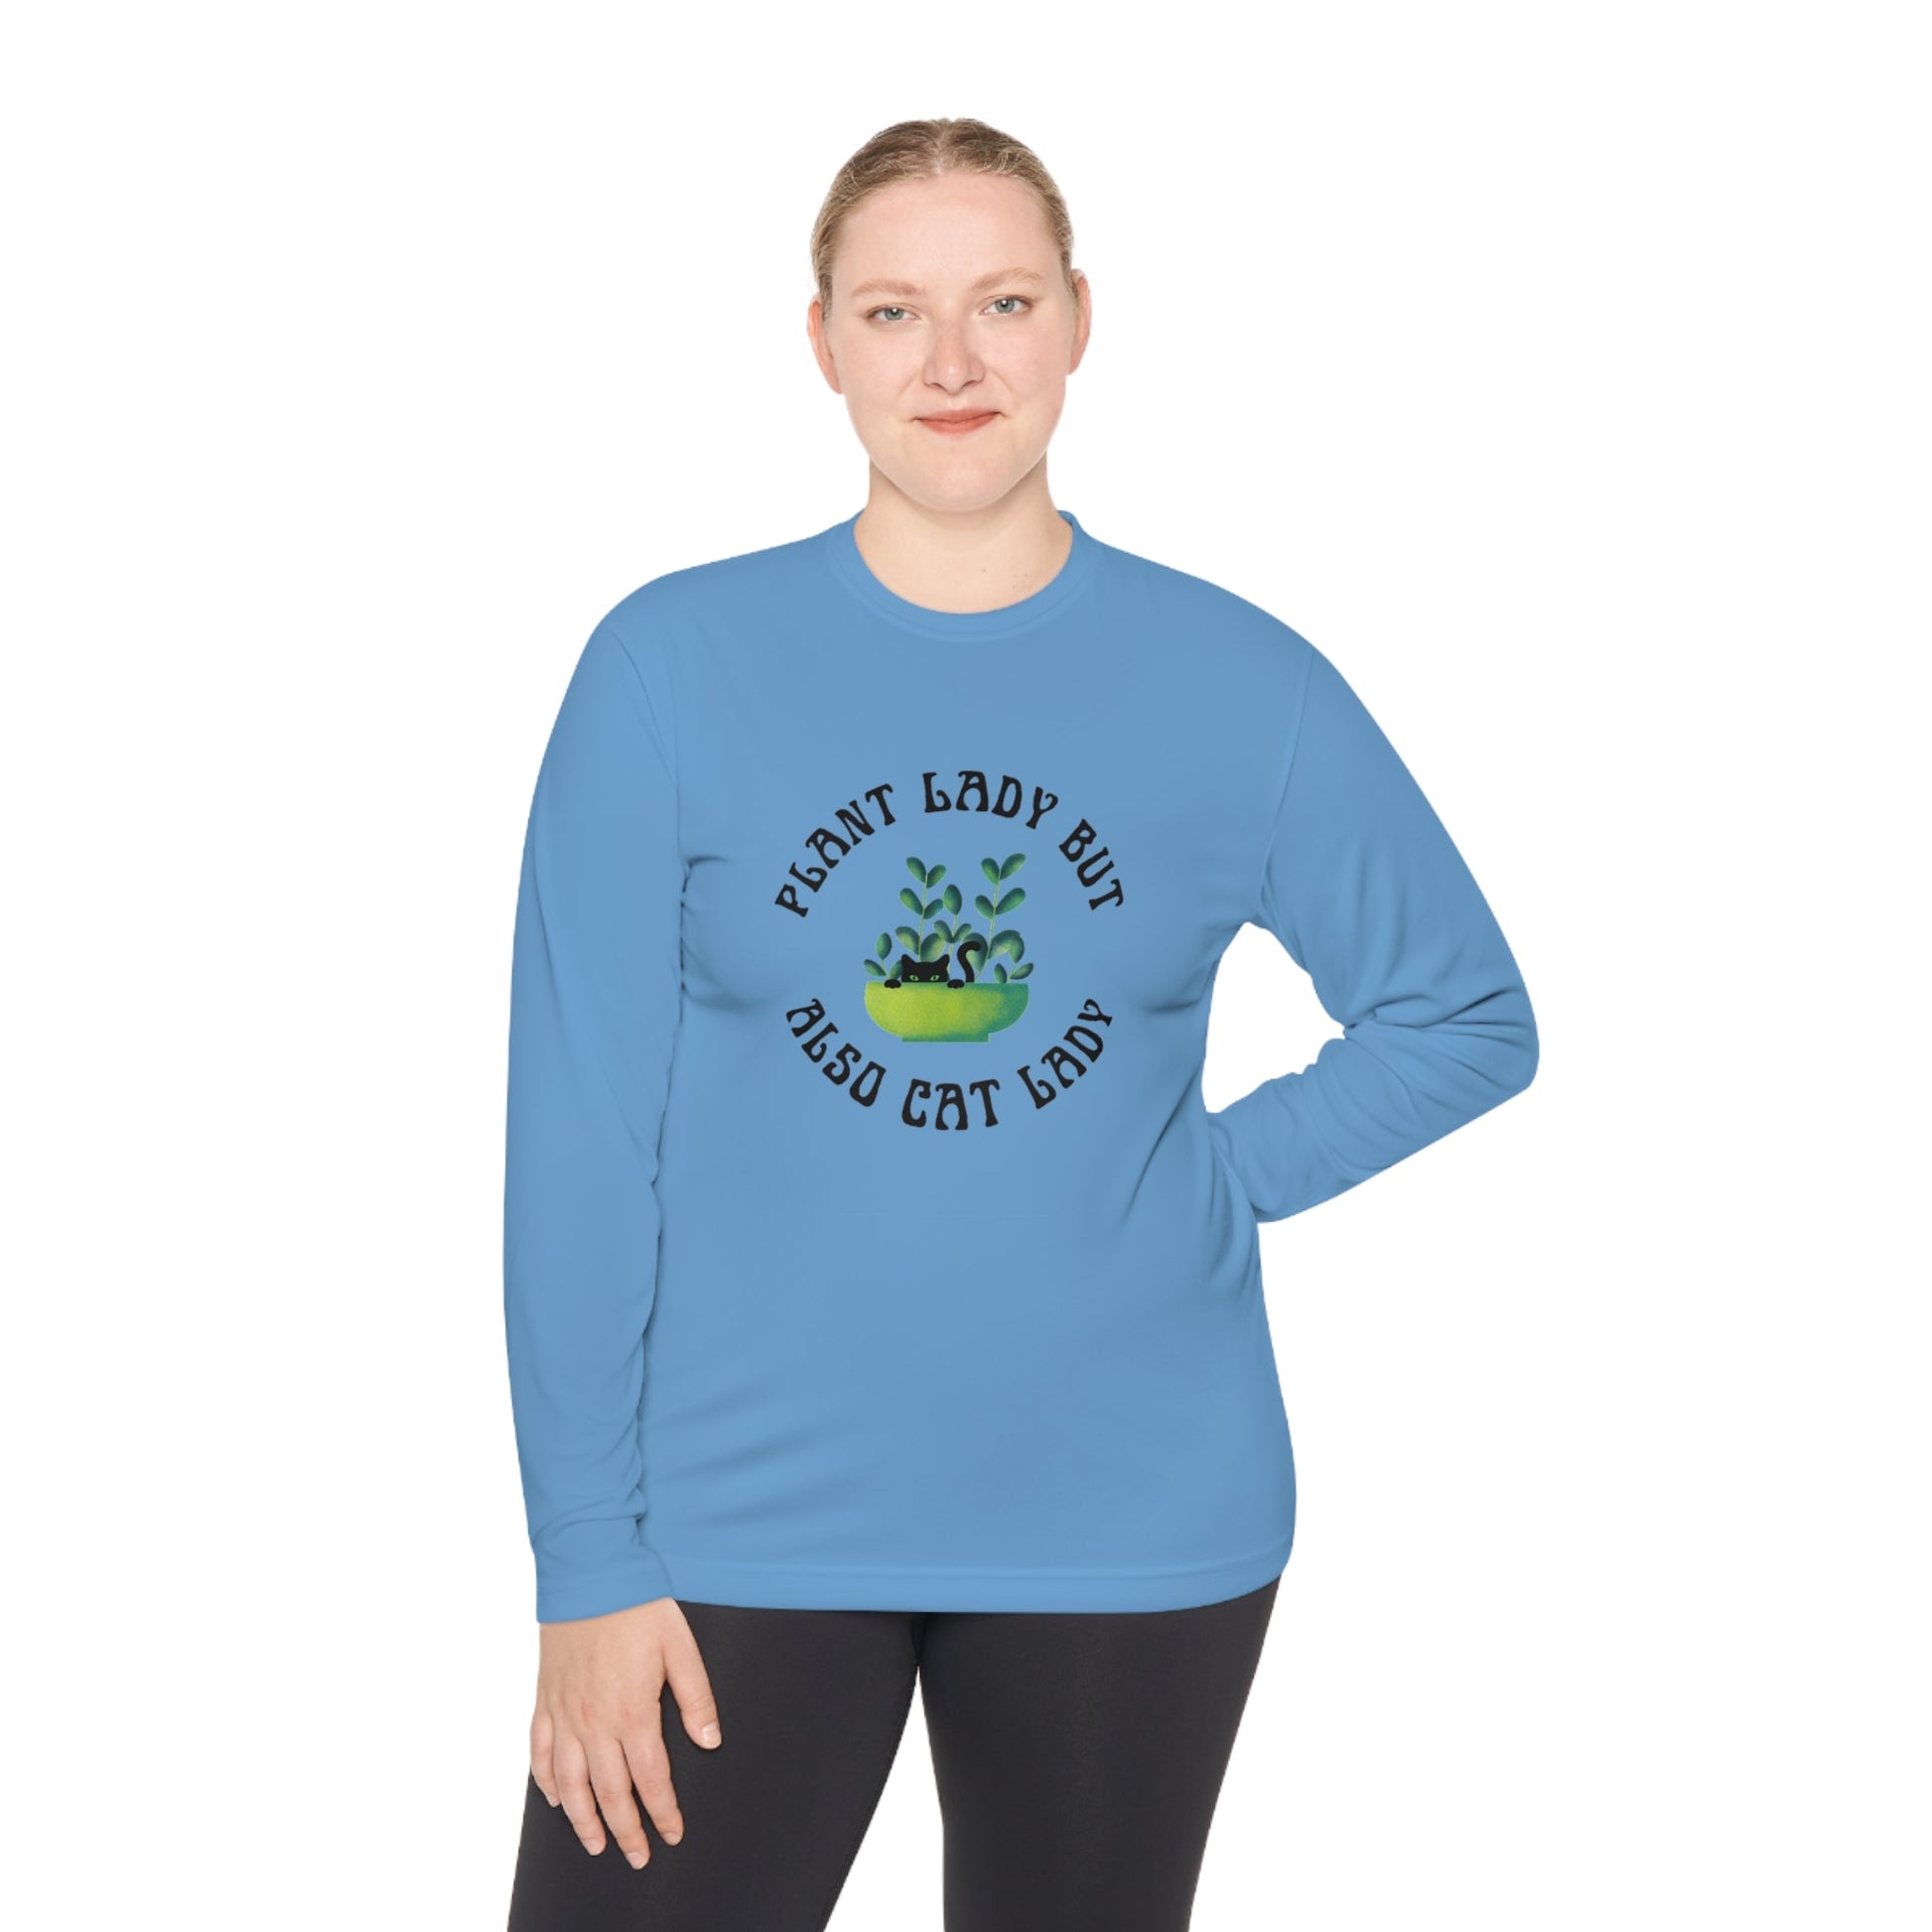 Plant Lady But Also Cat Lady Unisex Lightweight Long Sleeve Tee (Sizes through 4X)